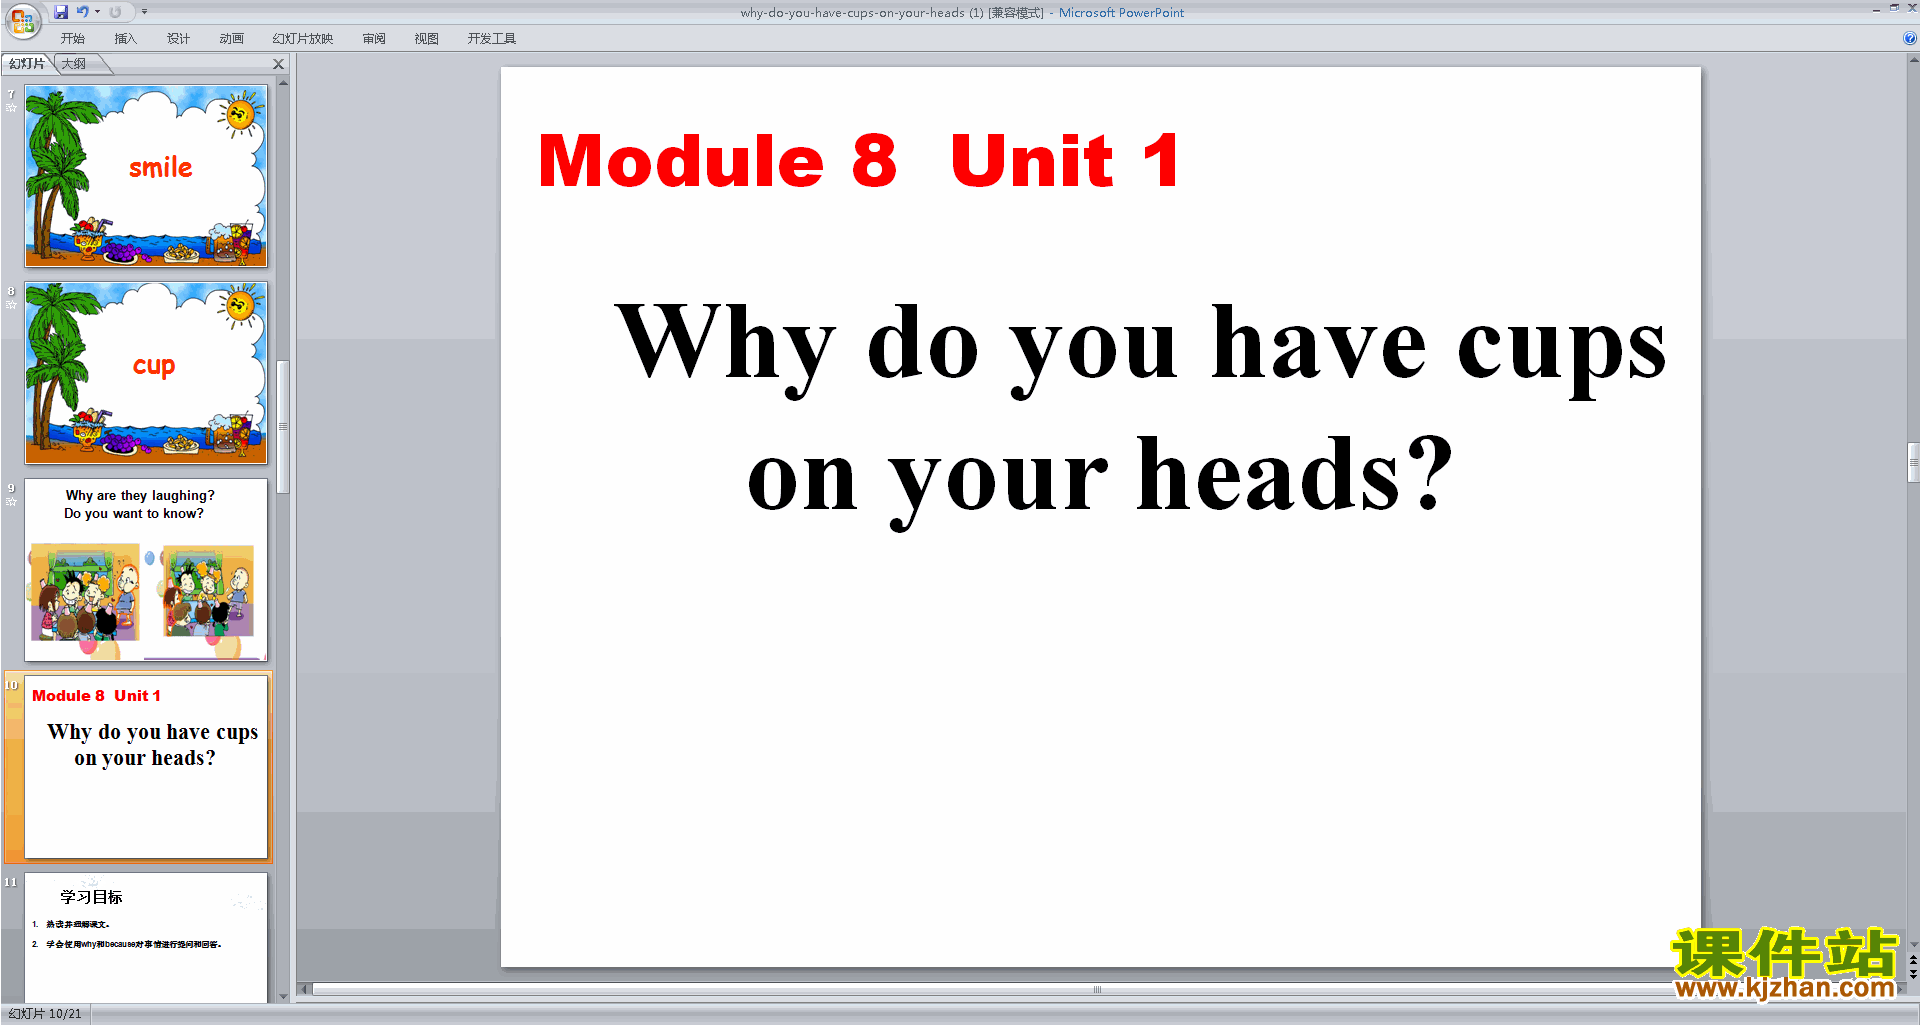 Module8 Why do you have cups on your headsμppt